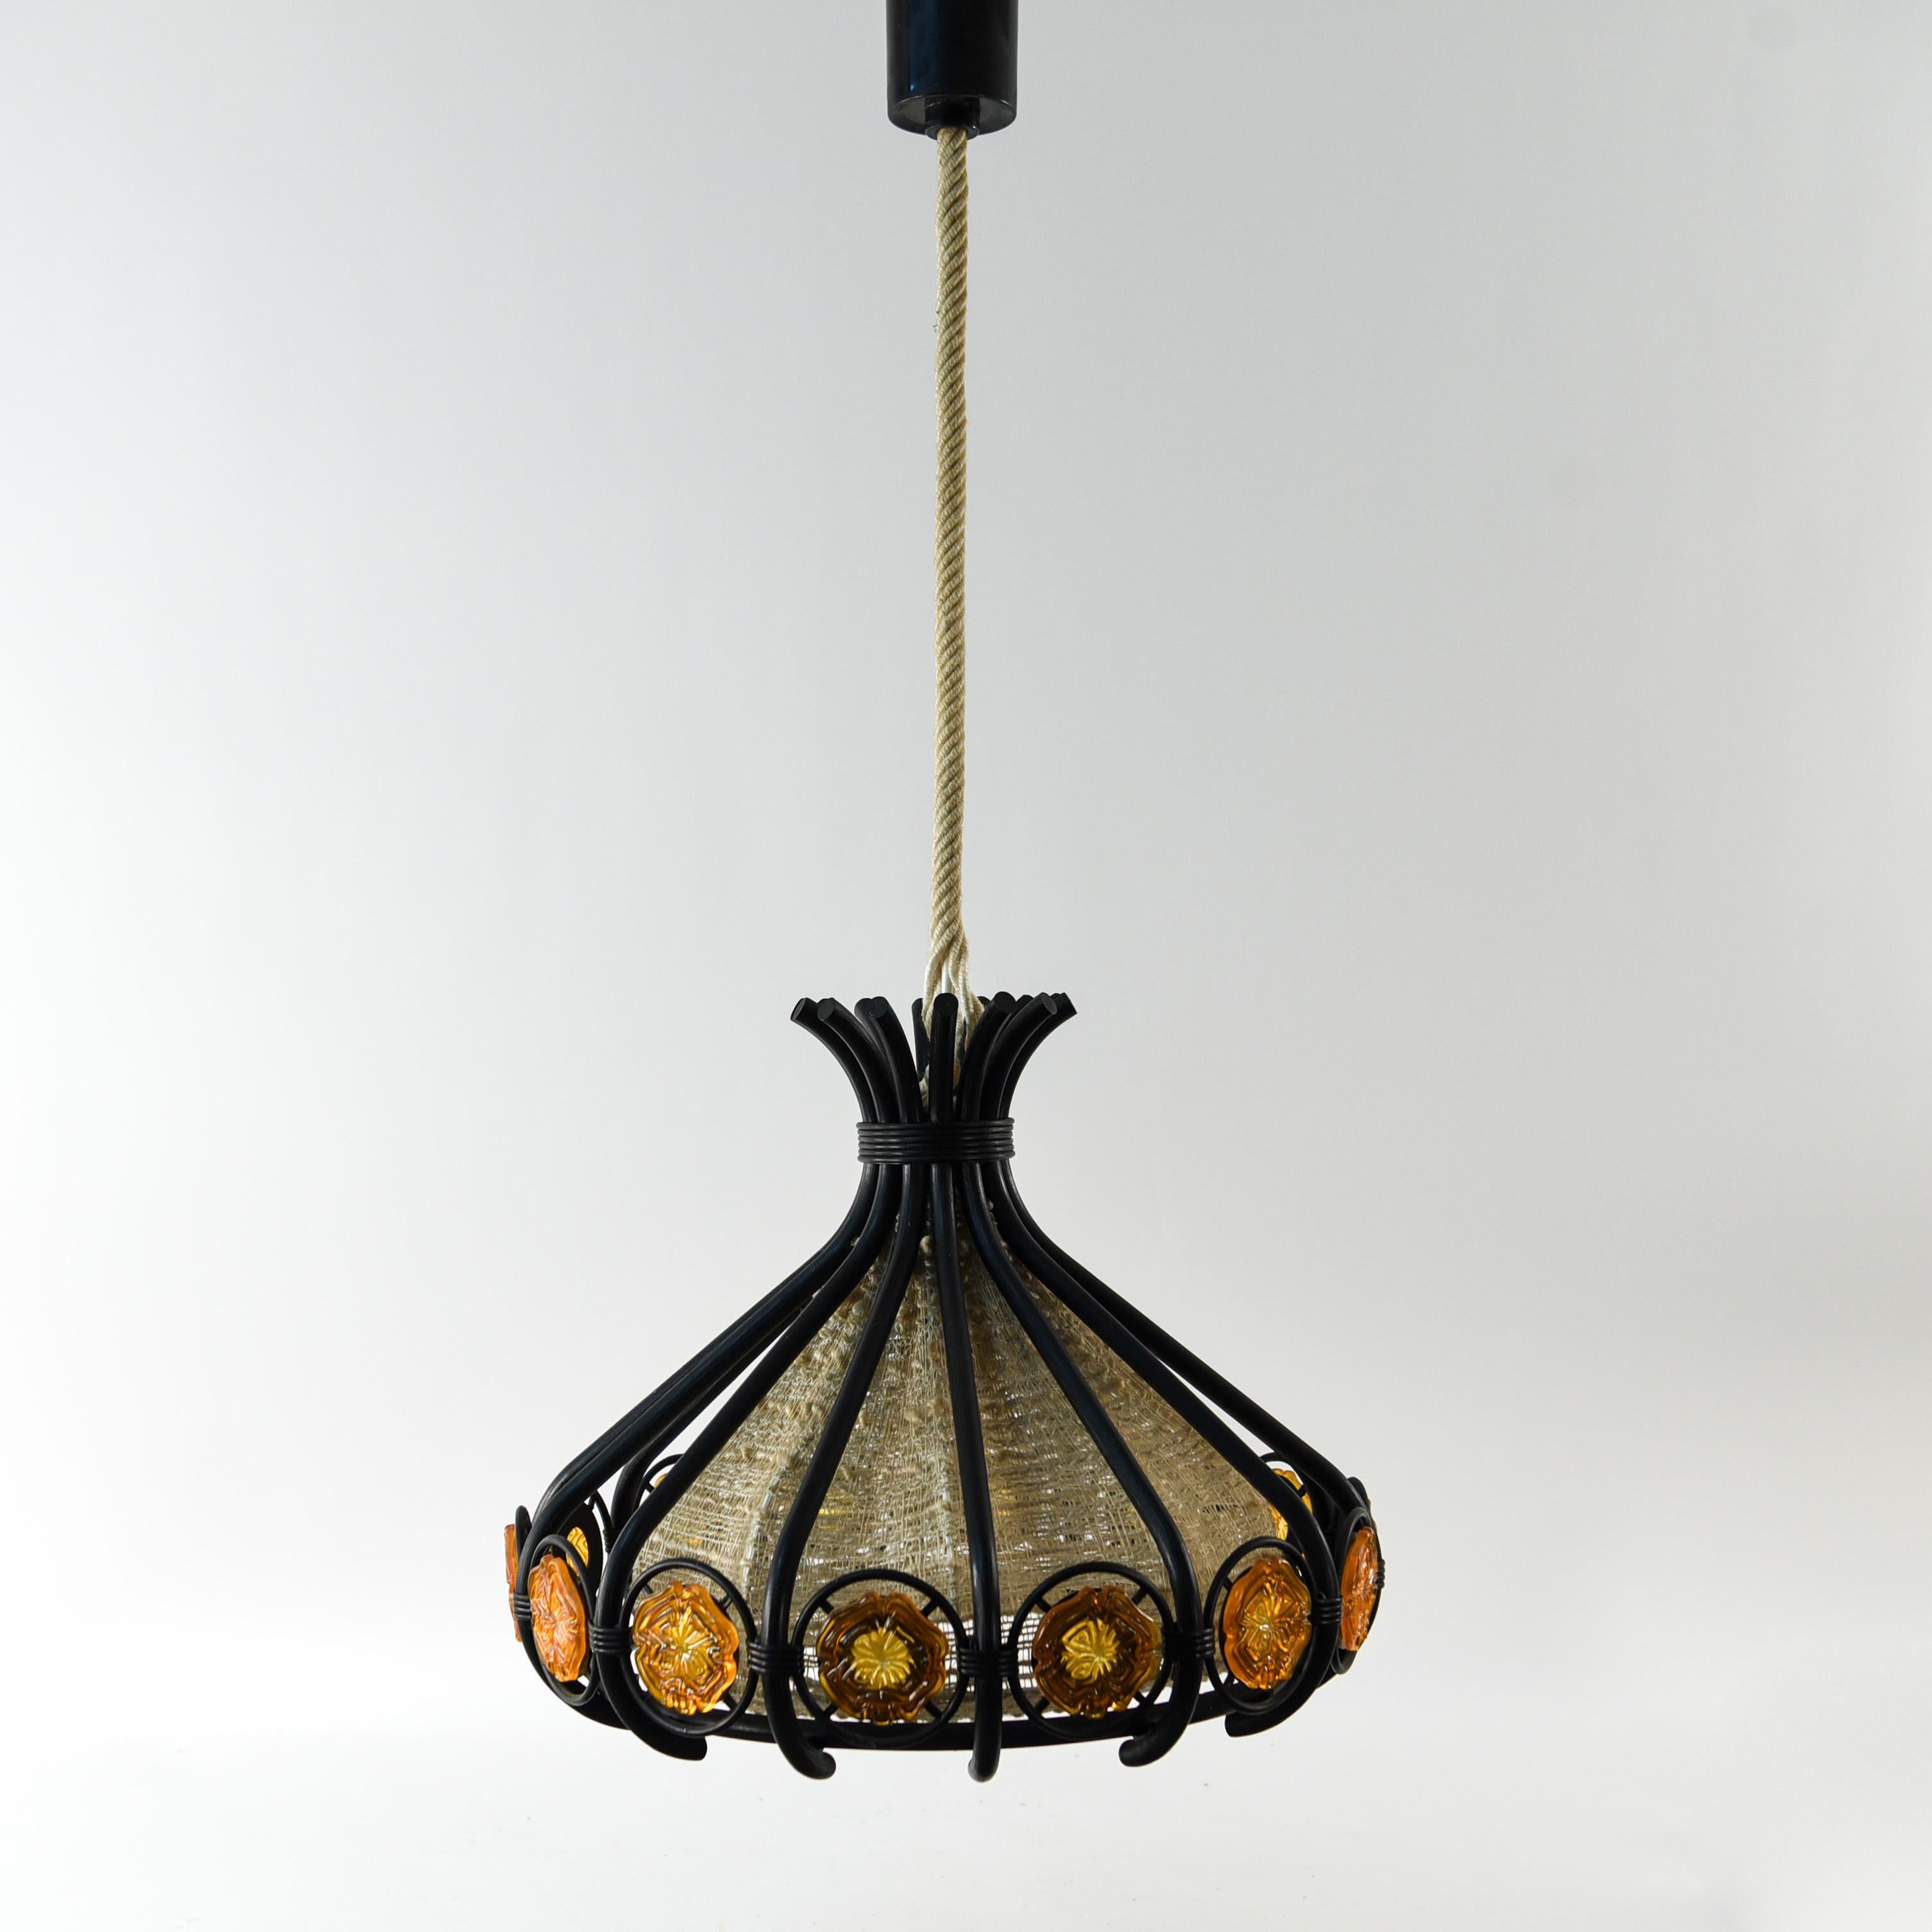 This is a very interesting Danish pendant light from the 1970s. This piece is full of appealing details from the texture of the interior body to the outer framework with orange glass inserts.